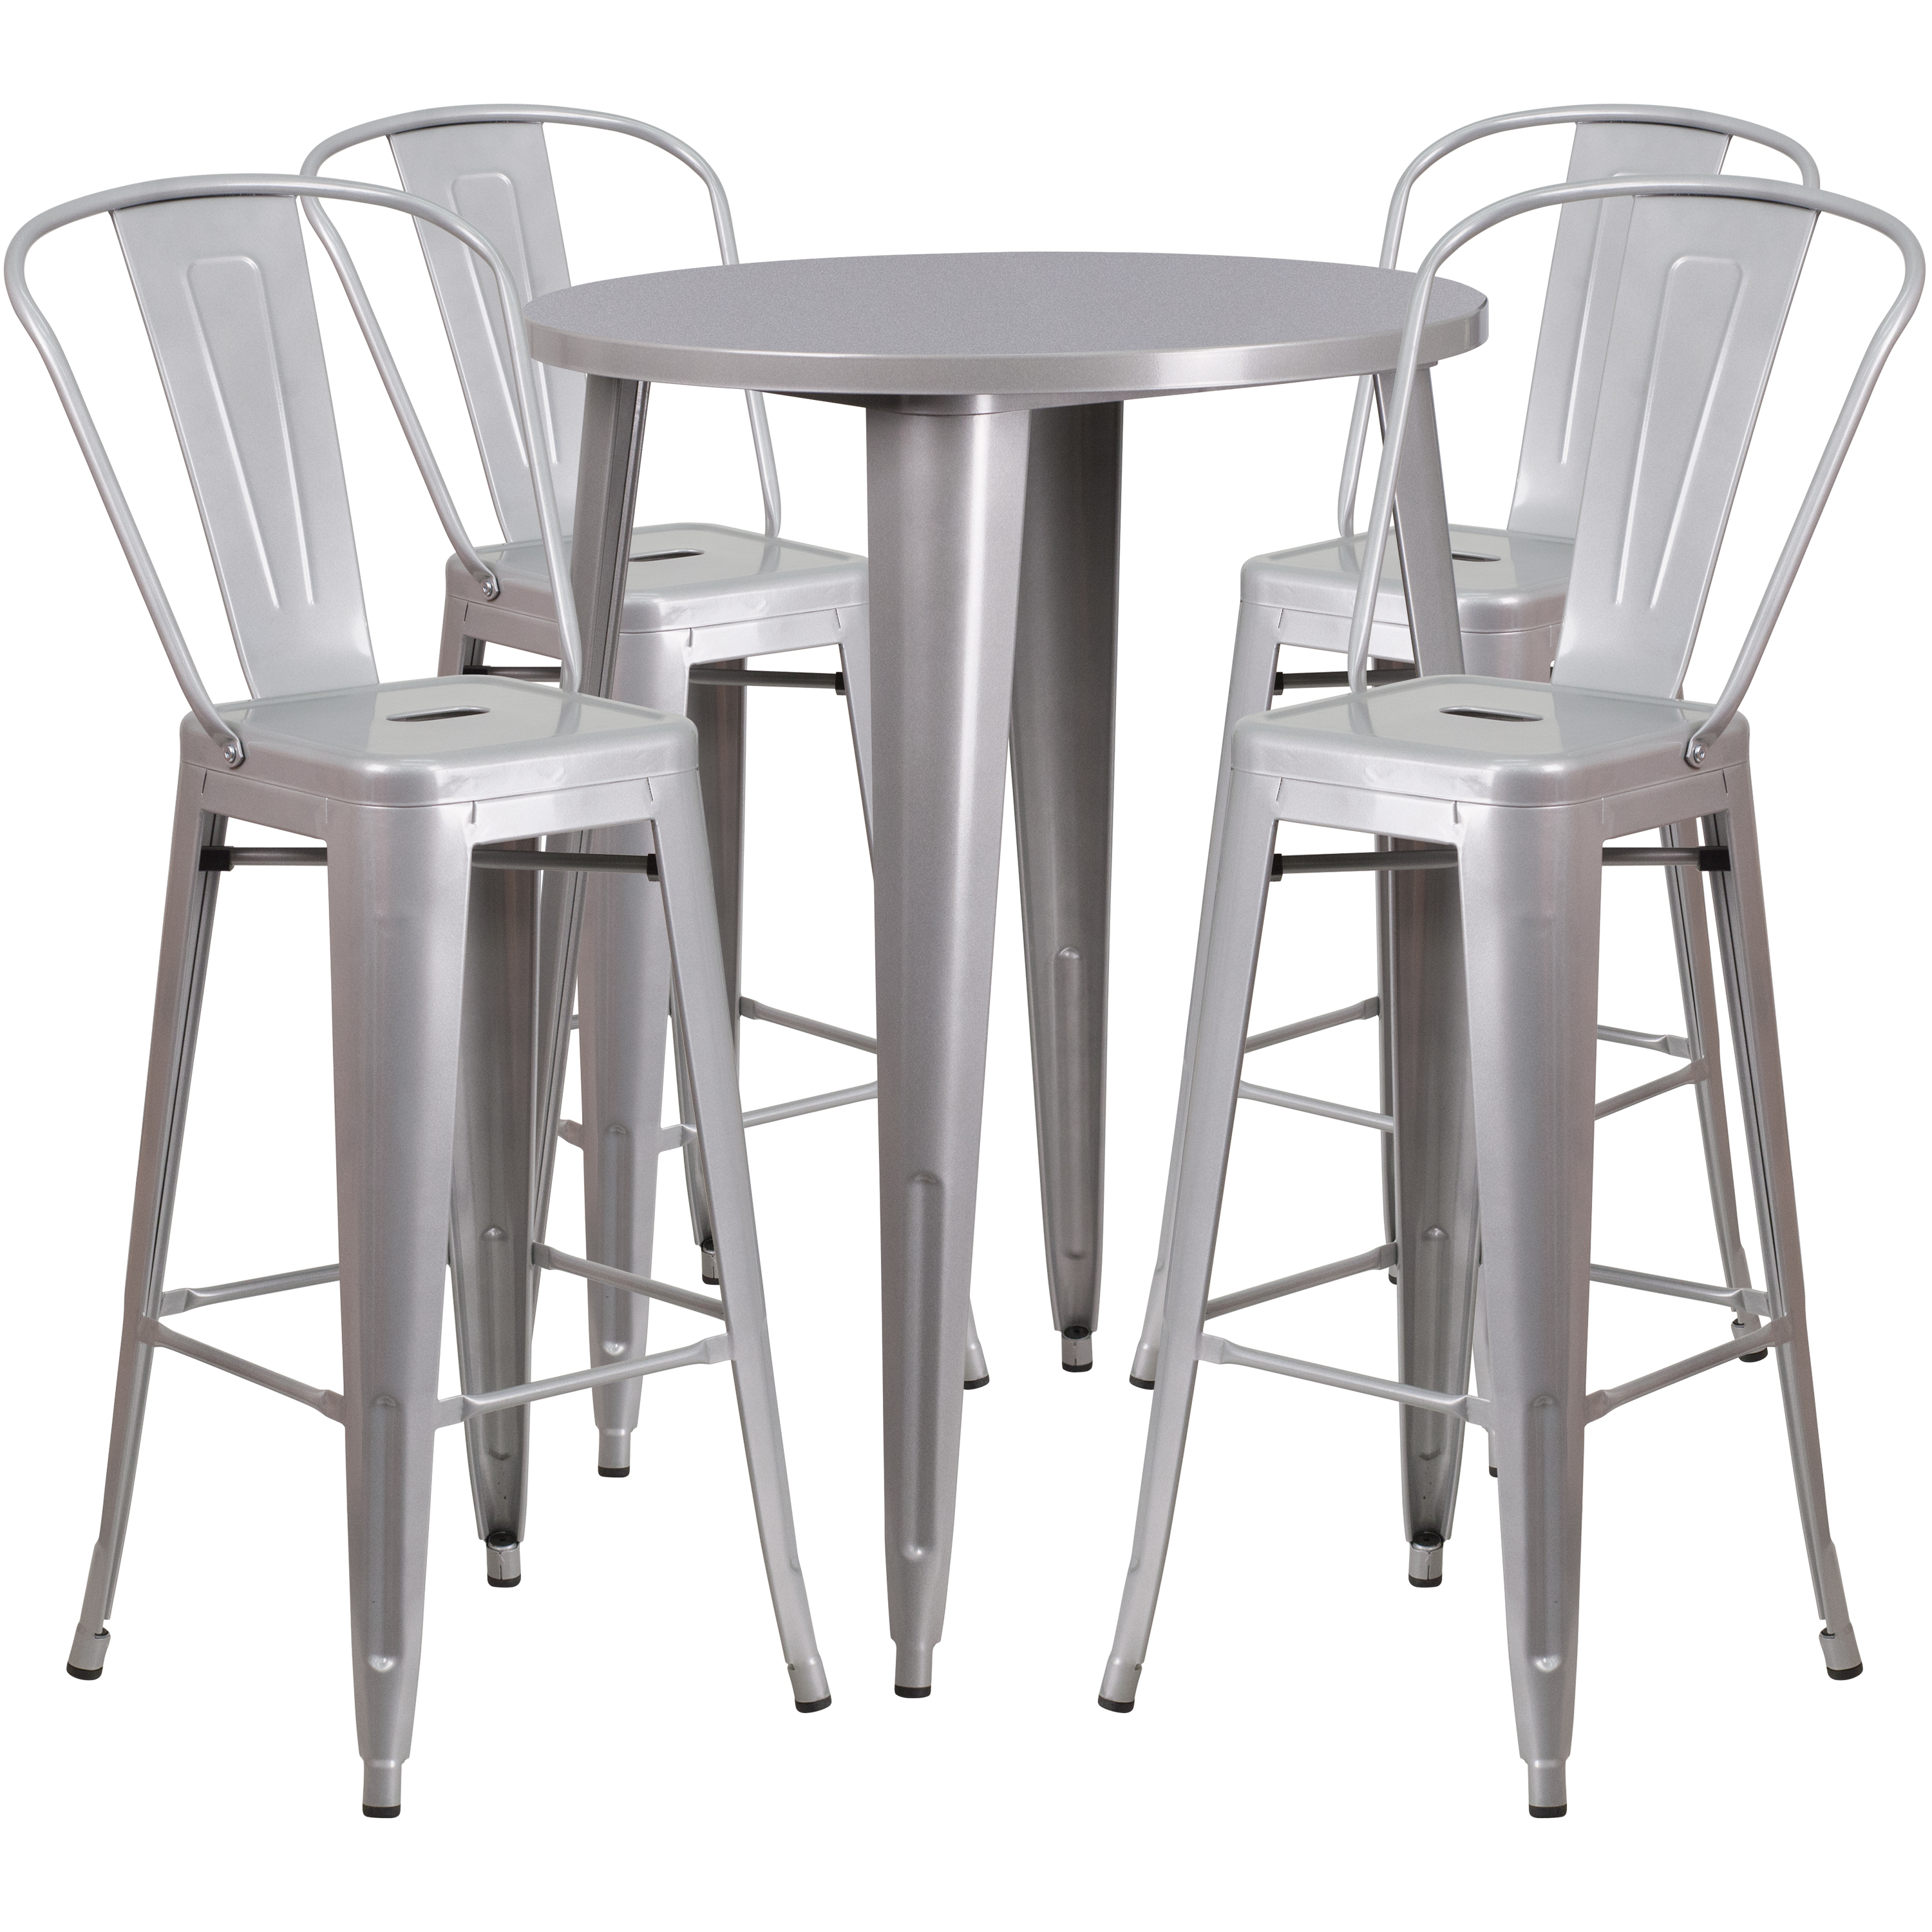 Flash Furniture Commercial Grade 30" Round Silver Metal Indoor-Outdoor Bar Table Set with 4 Cafe Stools - image 2 of 5